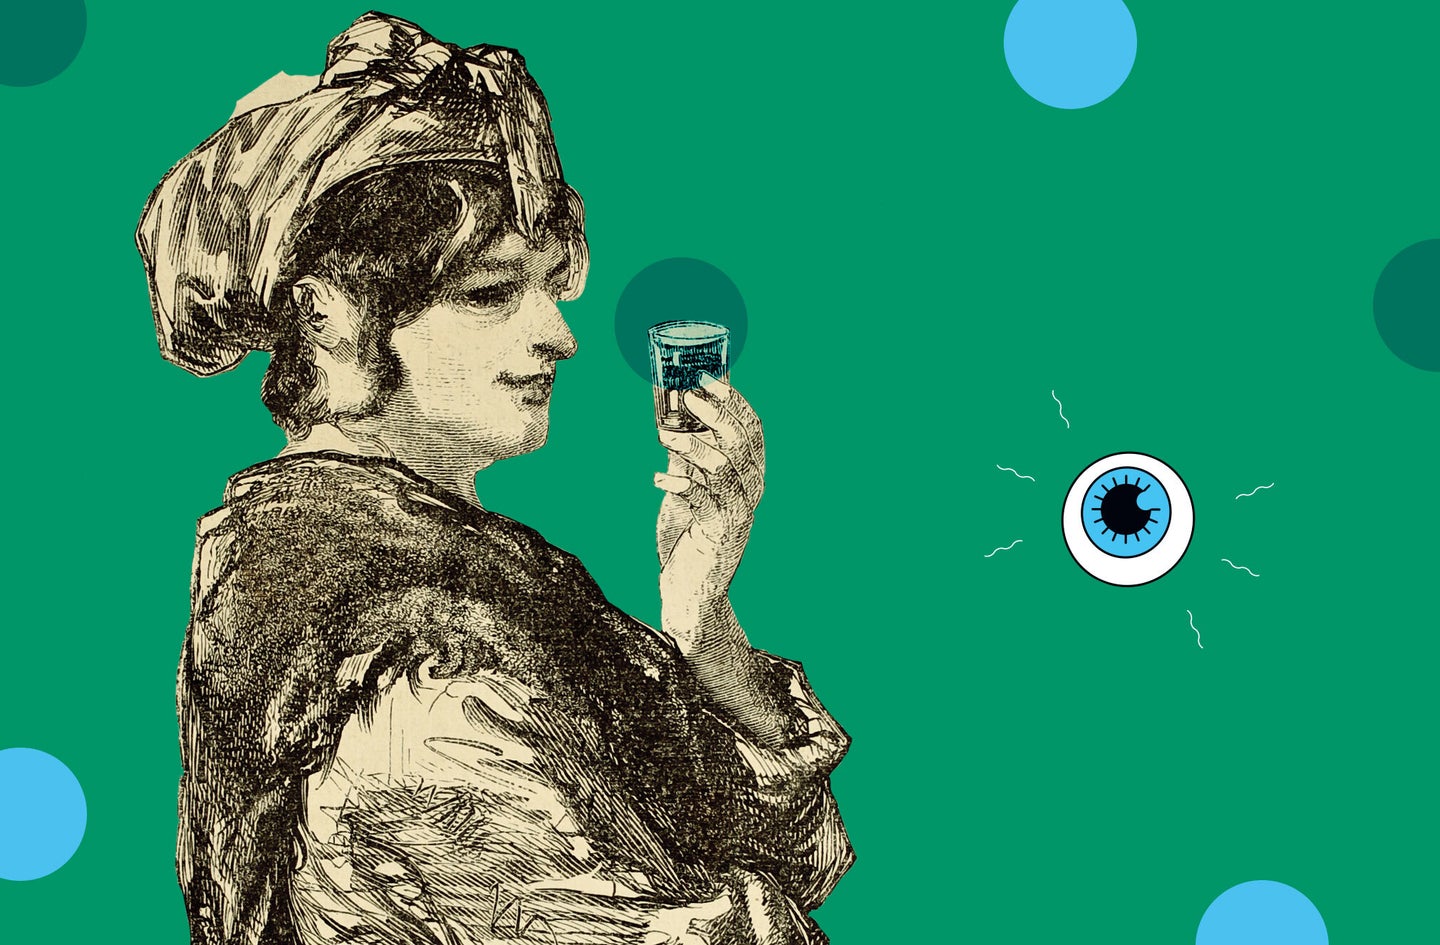 an old fashioned sketch of someone drinking out of a small glass on a green background with blue polka dots and a drawing of an eyeball